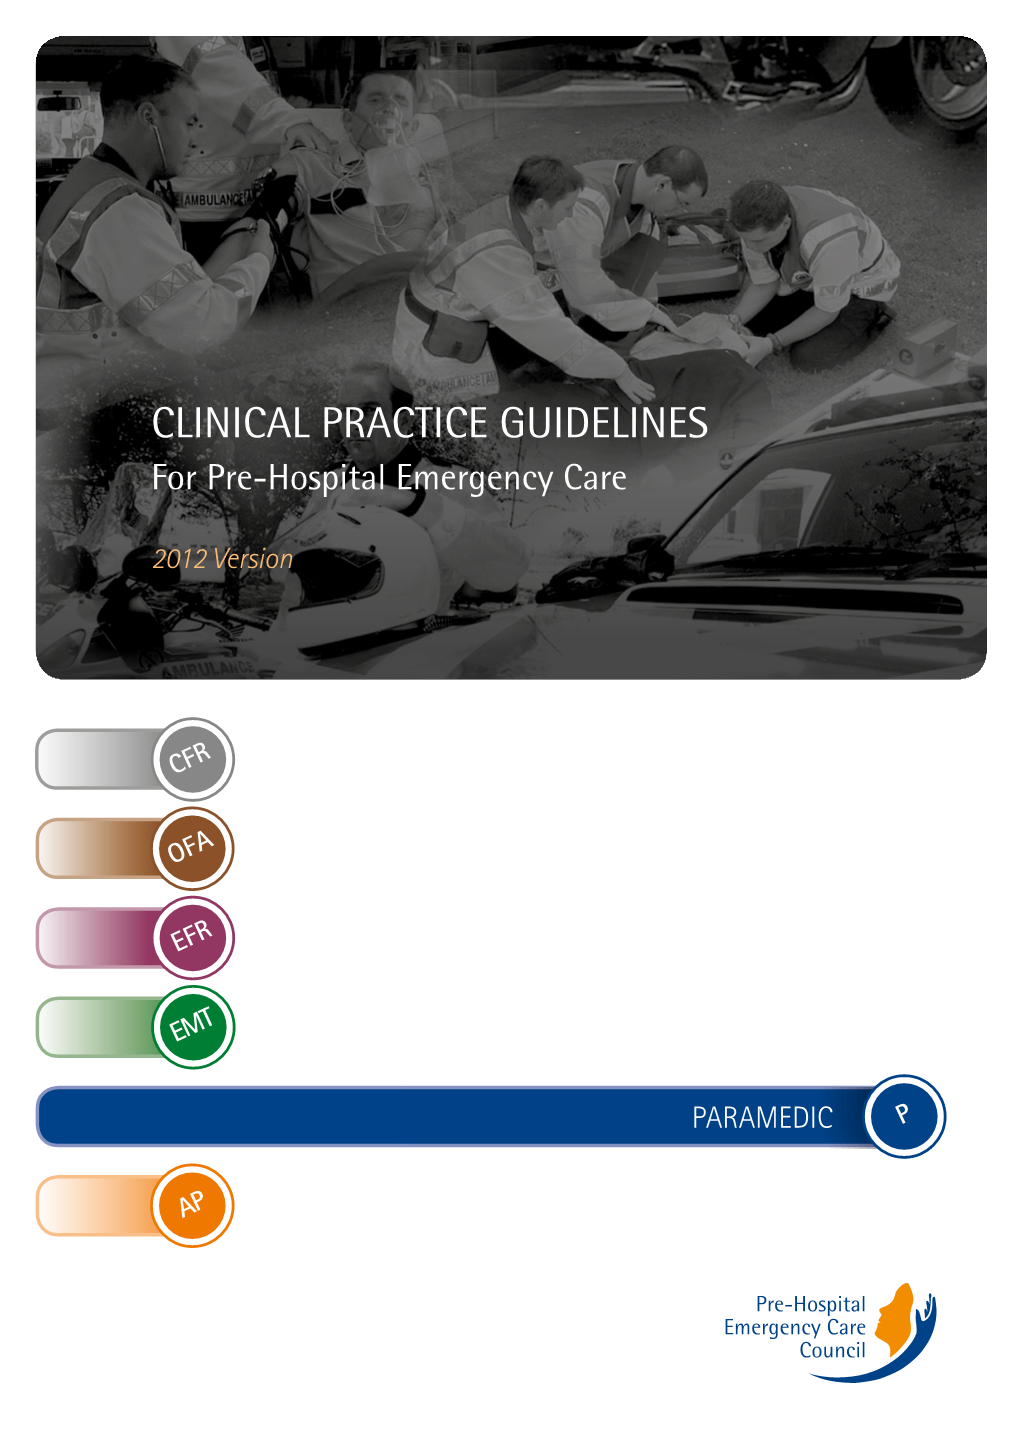 CLINICAL PRACTICE GUIDELINES for Pre-Hospital Emergency Care